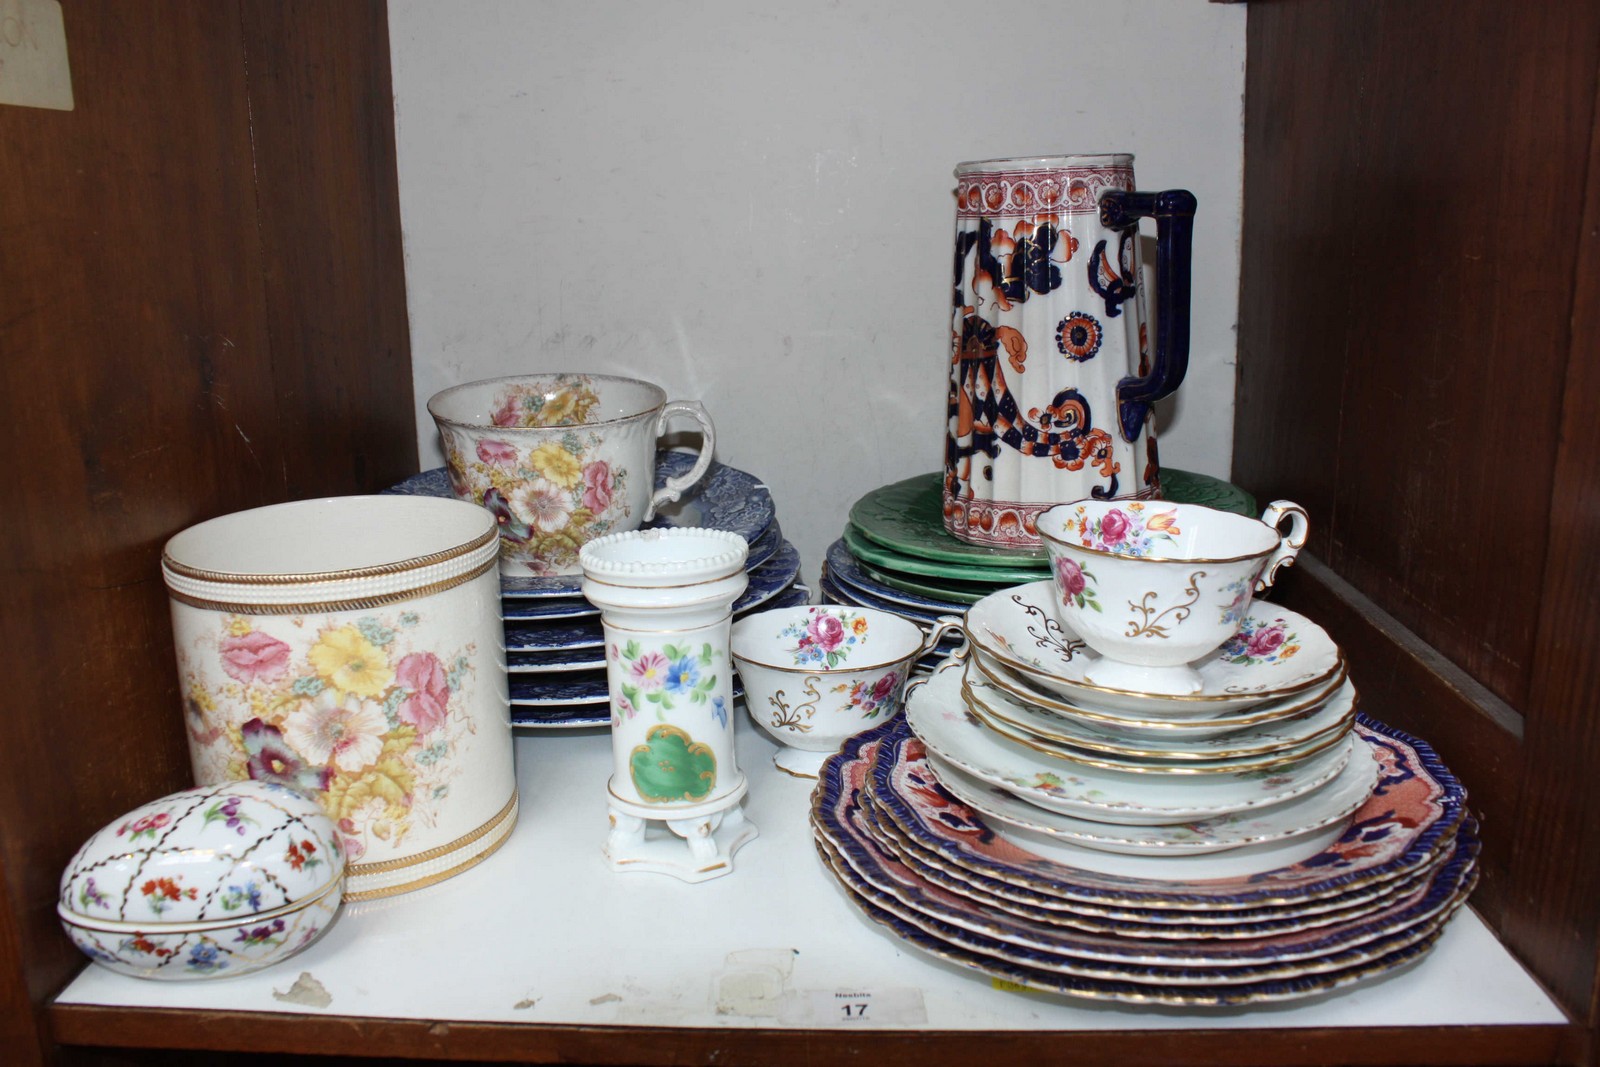 SECTION 17 & 18. Two shelves of assorted ceramics including blue and white china, a hunting tea set,